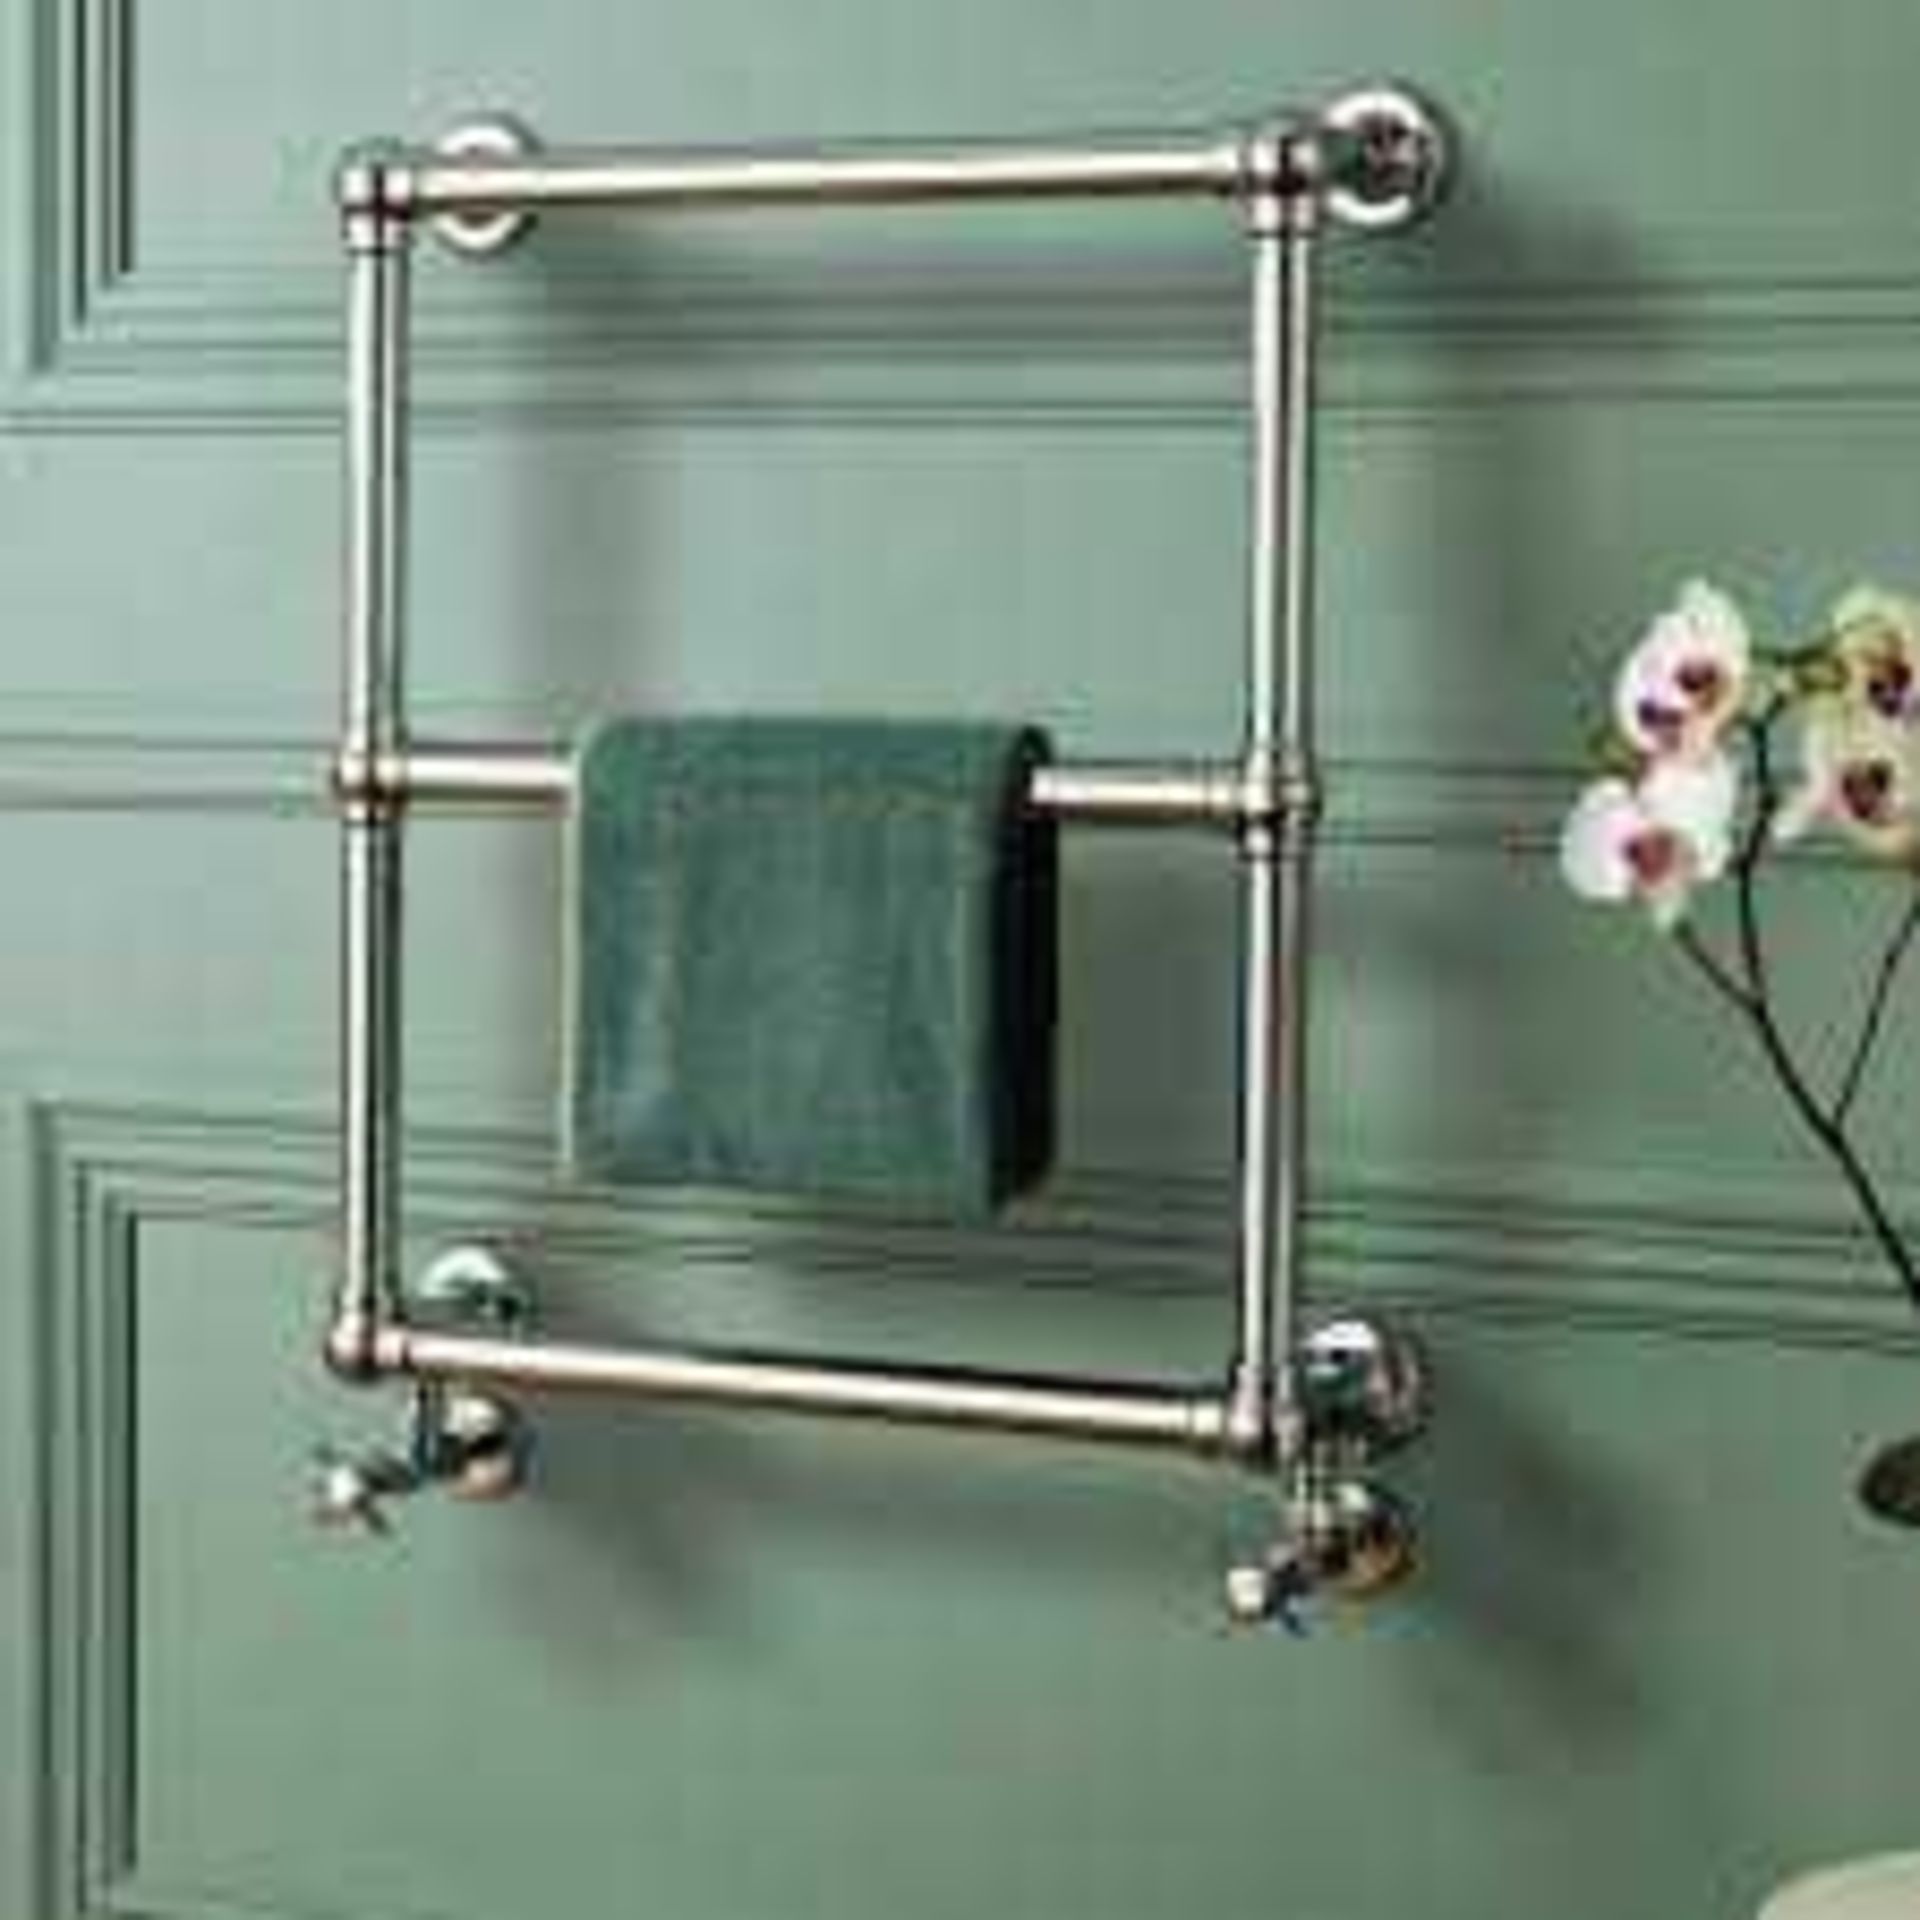 Rrp £200 Boxed Brand New Burcombe W600Xh686 Steel Ball Jointed Chrome Towel Rail - Image 2 of 2